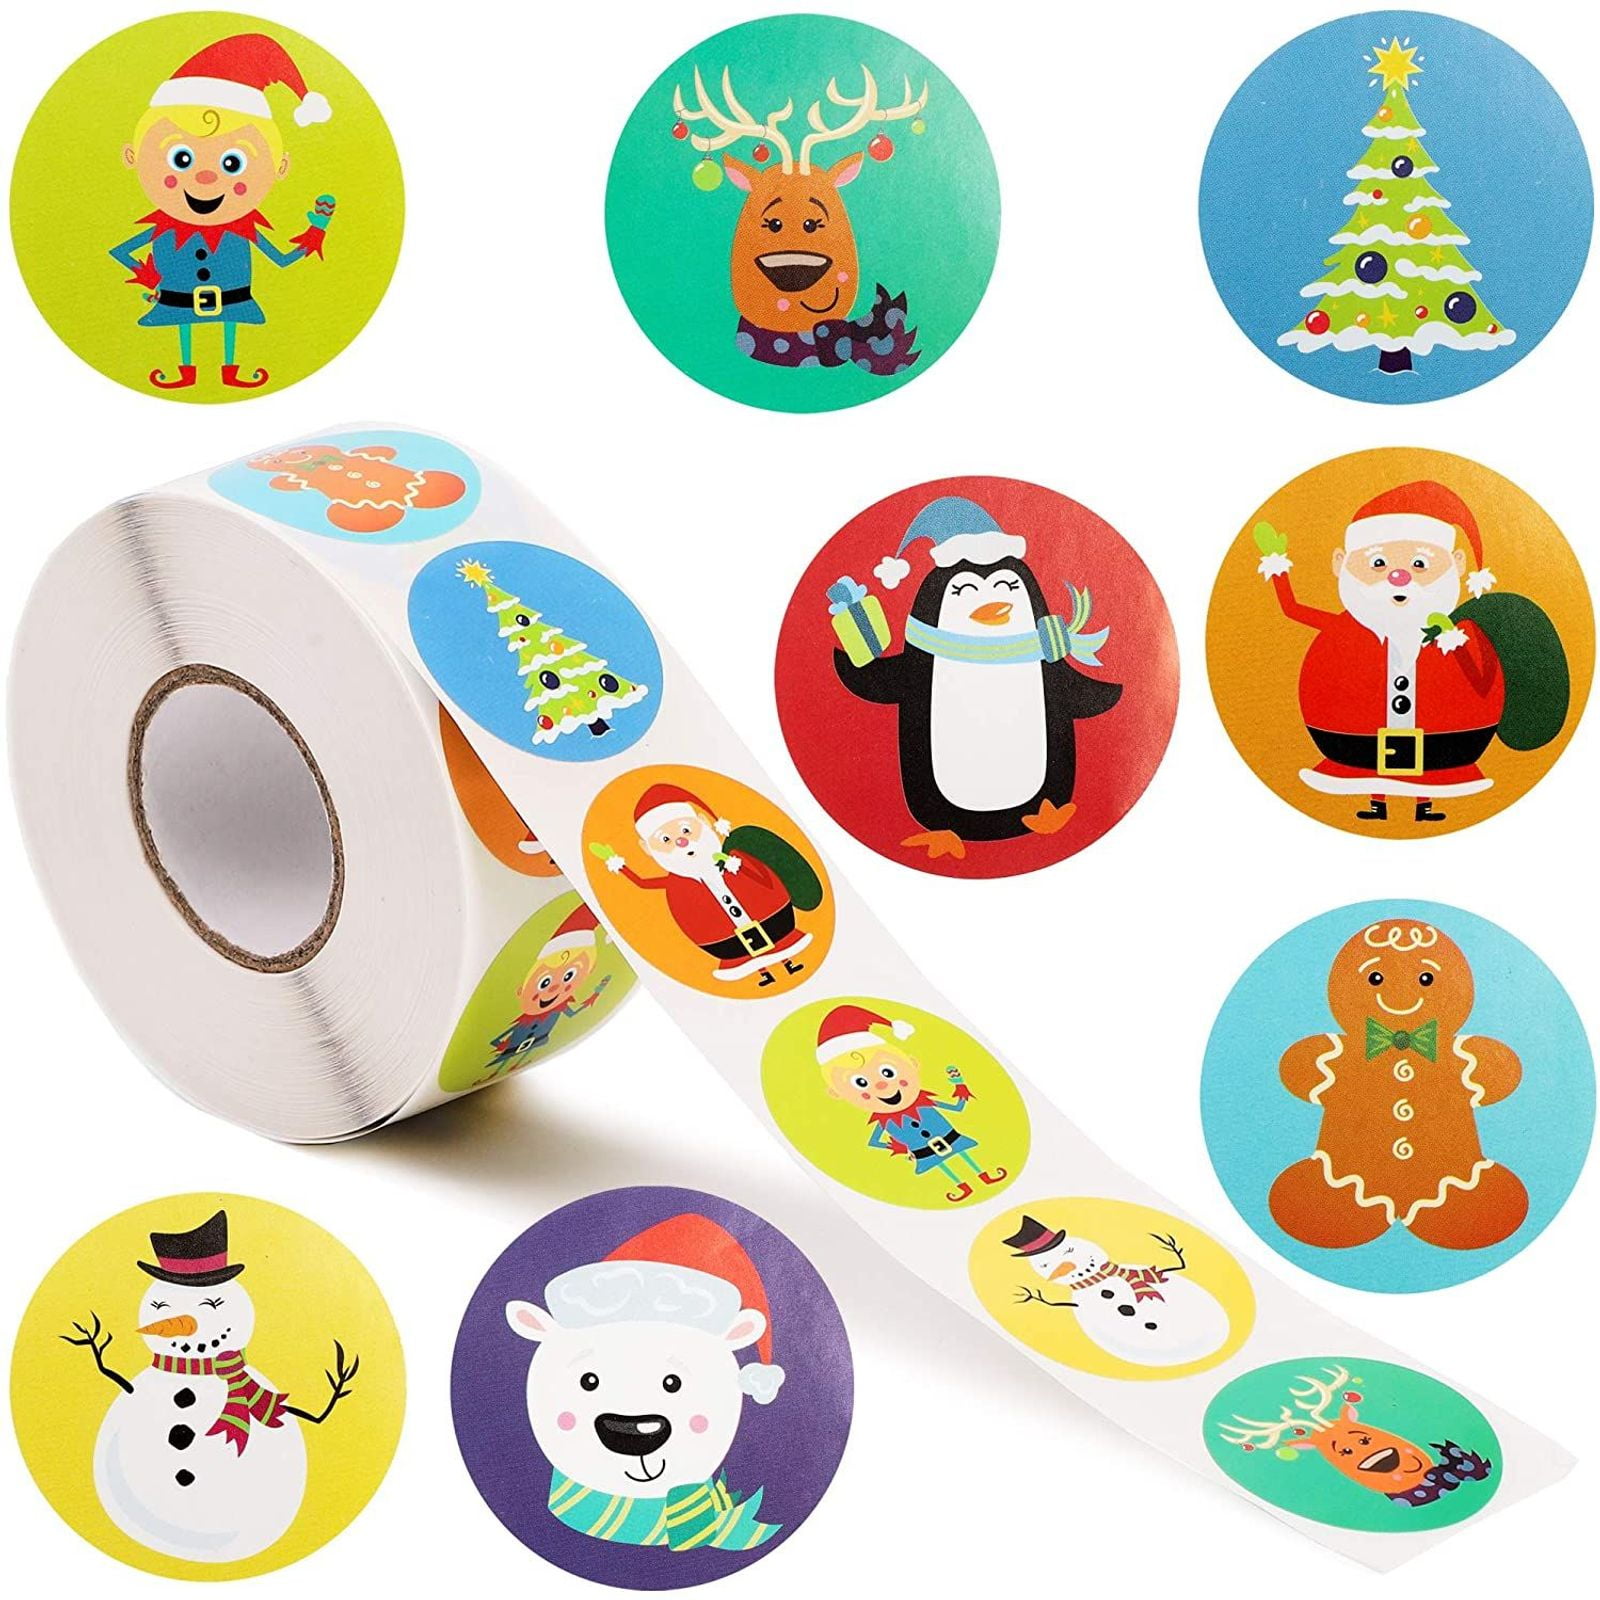 Ornament Stickers Roll Sticker for Christmas Party Supply Classroom Decoration 500 pcs